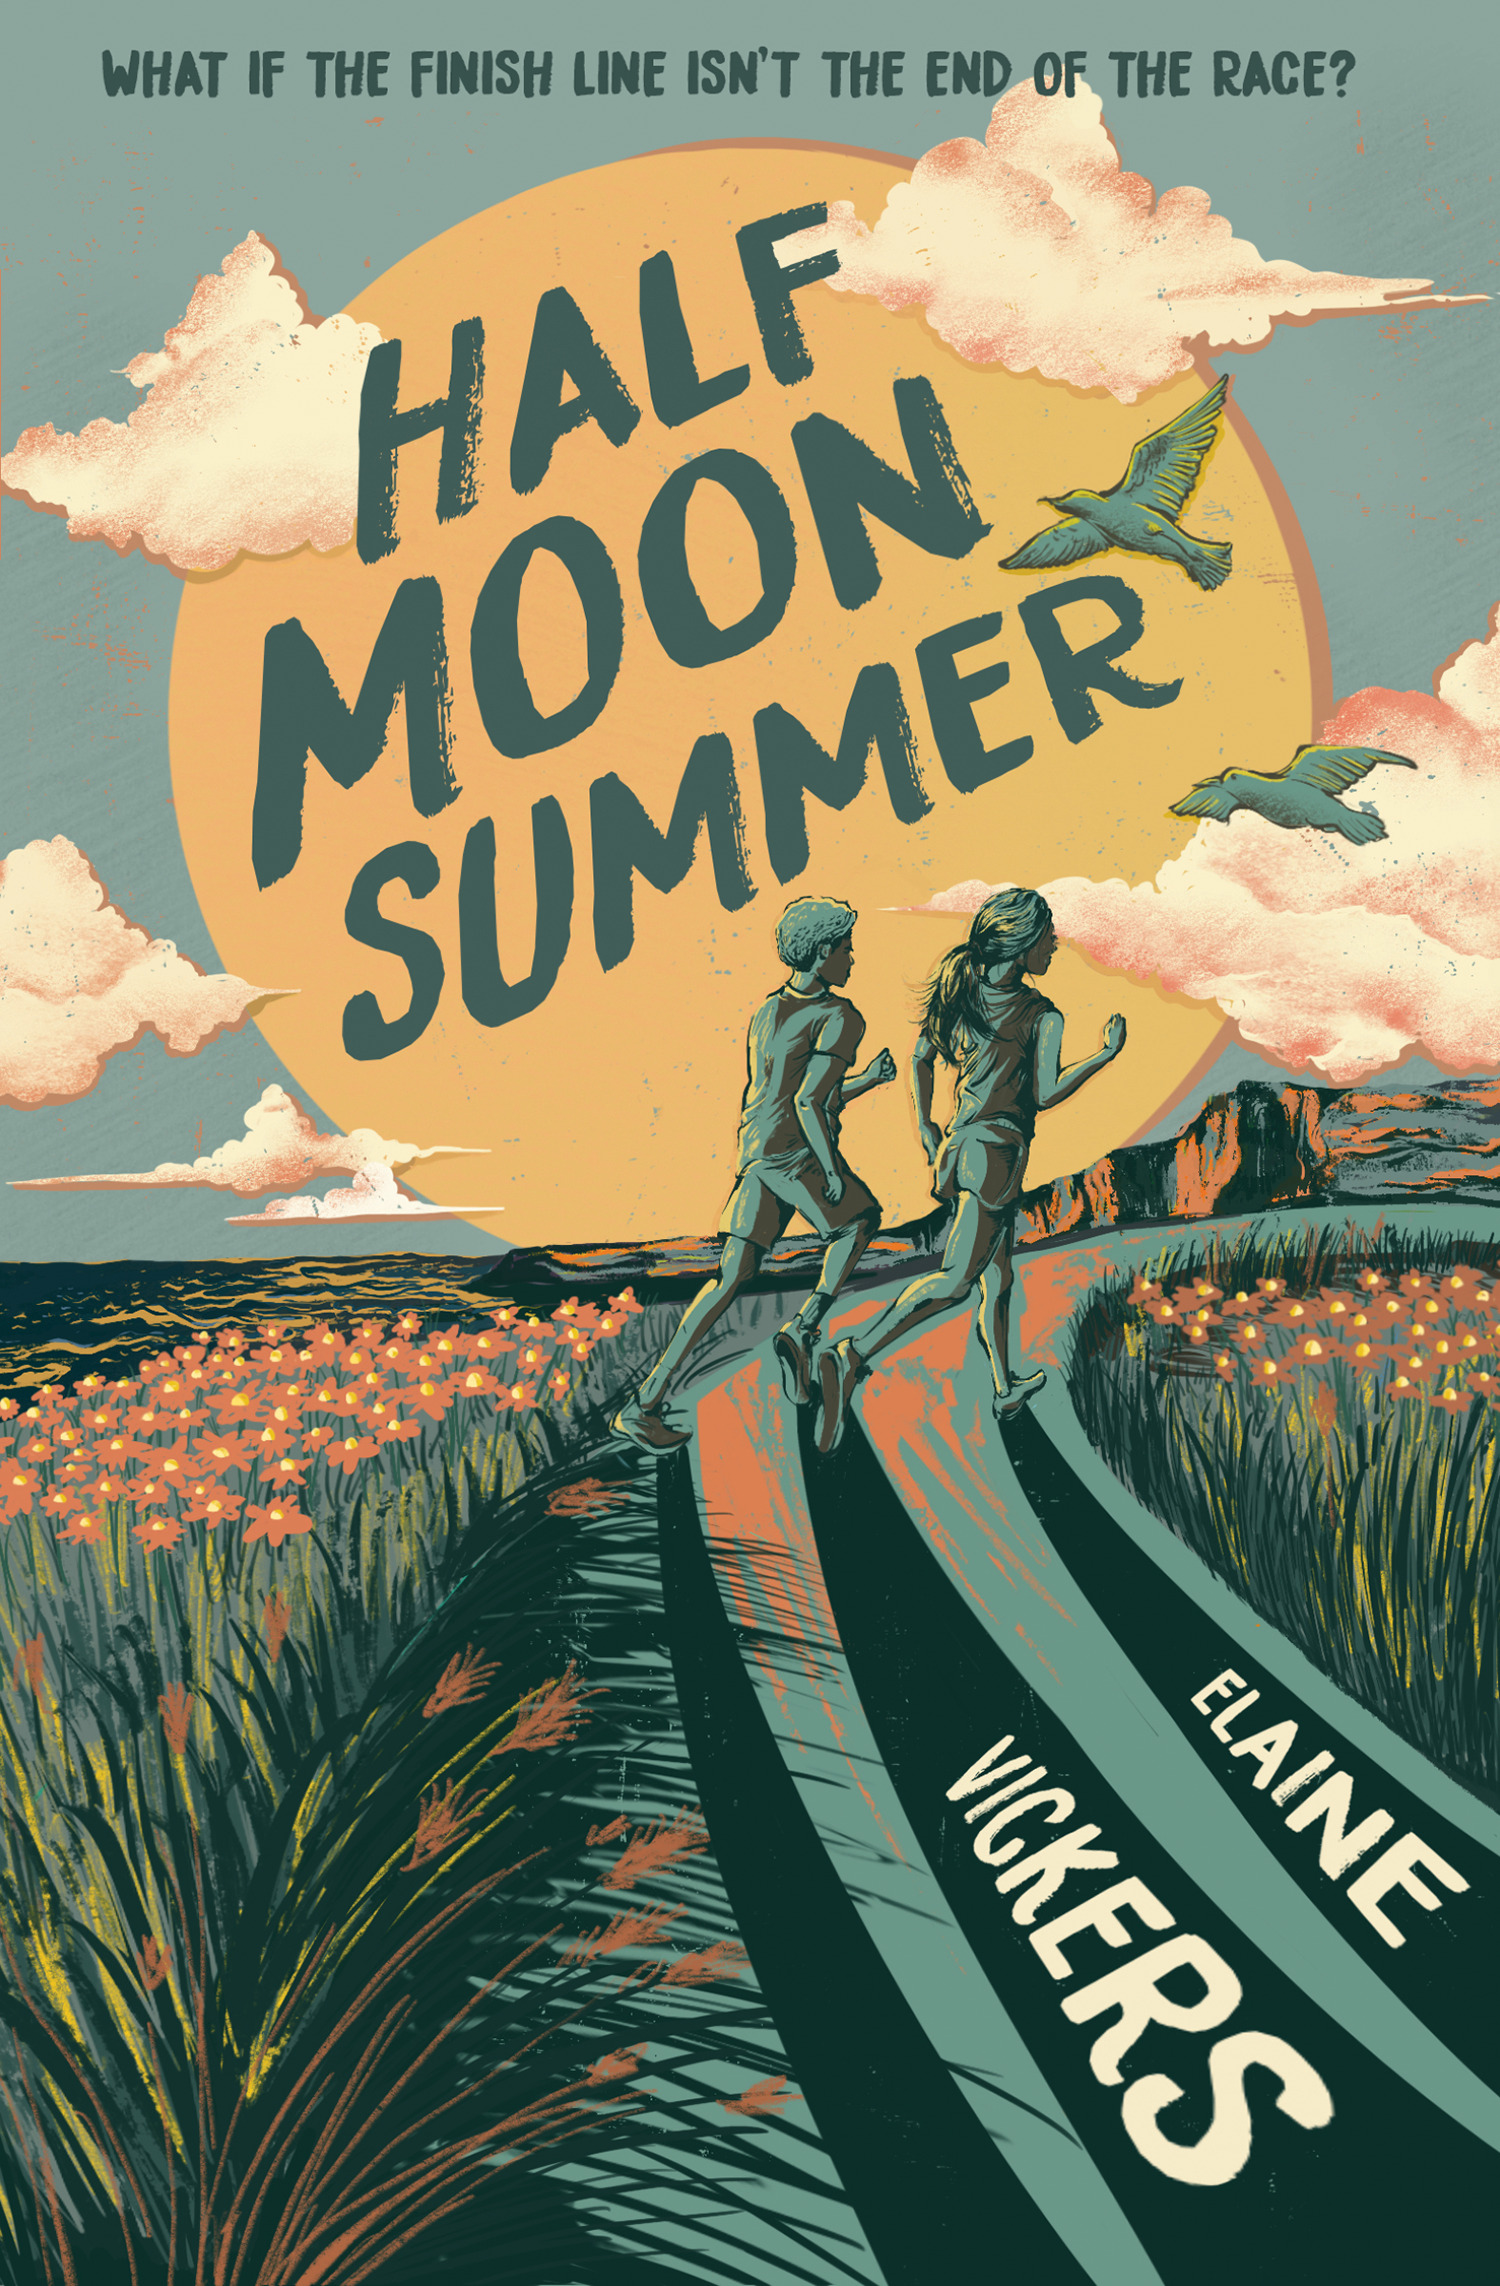 Cover Reveal: HALF MOON SUMMER by Elaine Vickers